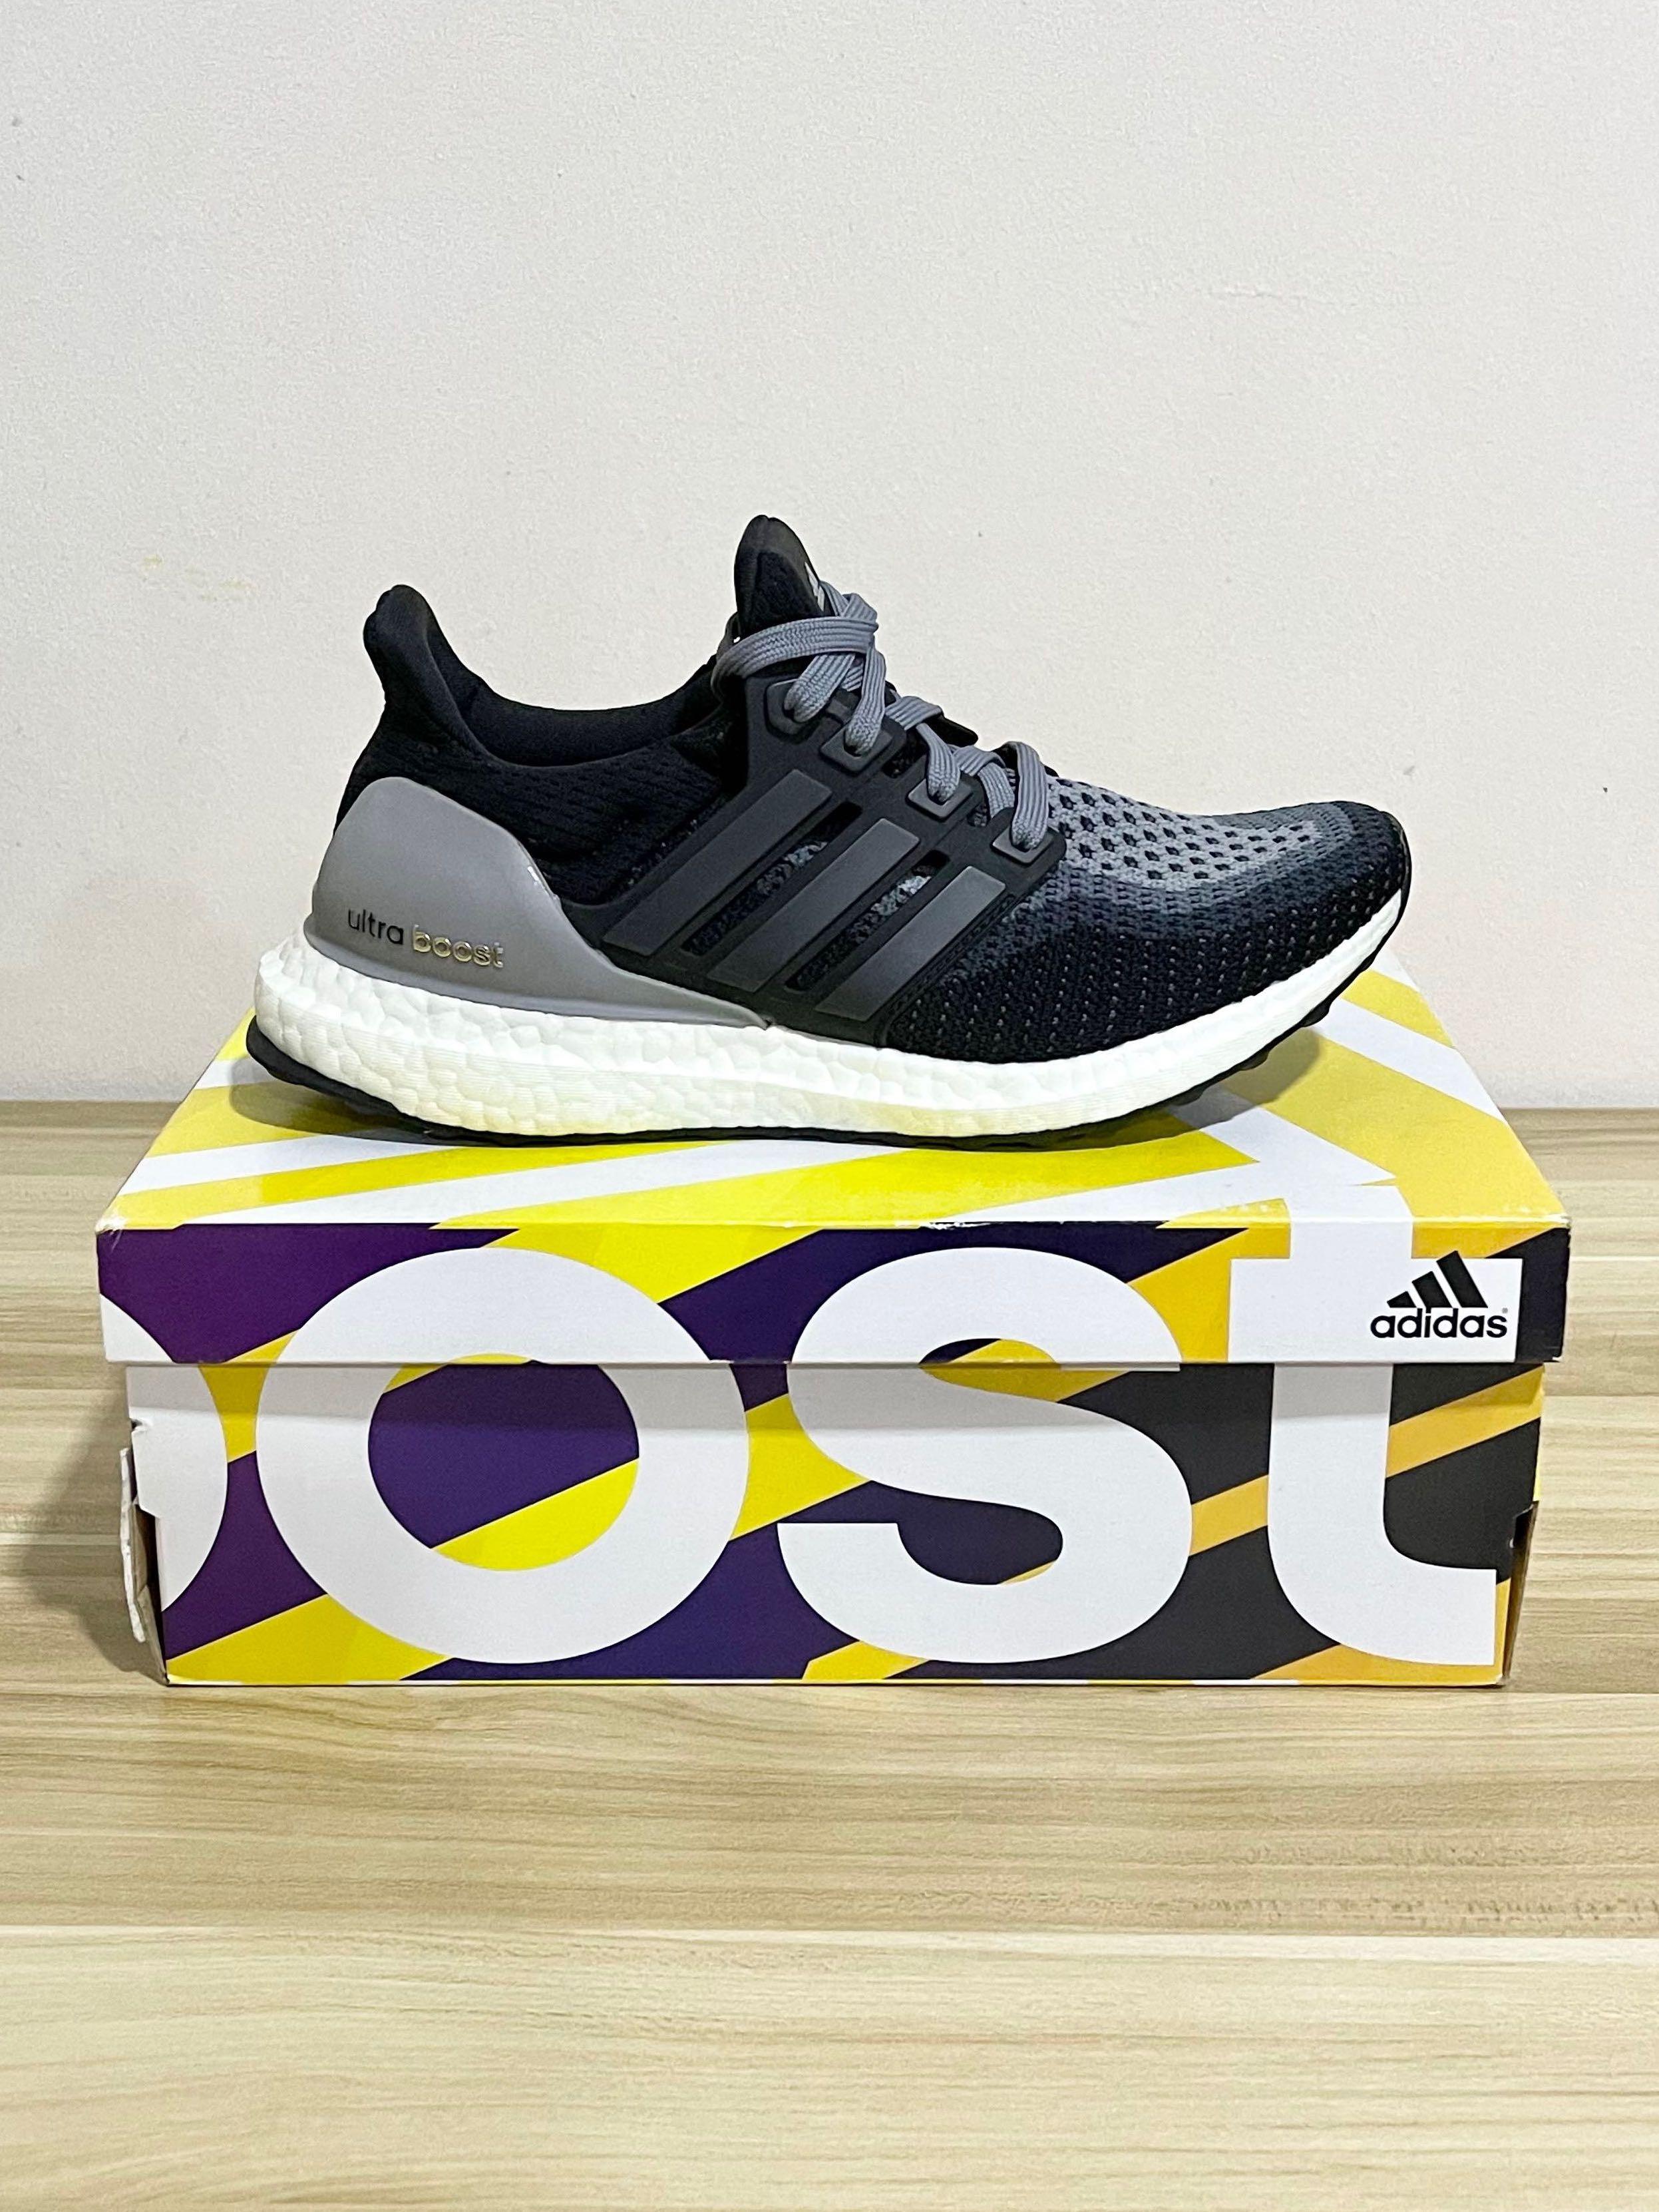 Adidas Ultraboost 2 0 Black Grey Ultra Boost Women S Fashion Shoes On Carousell